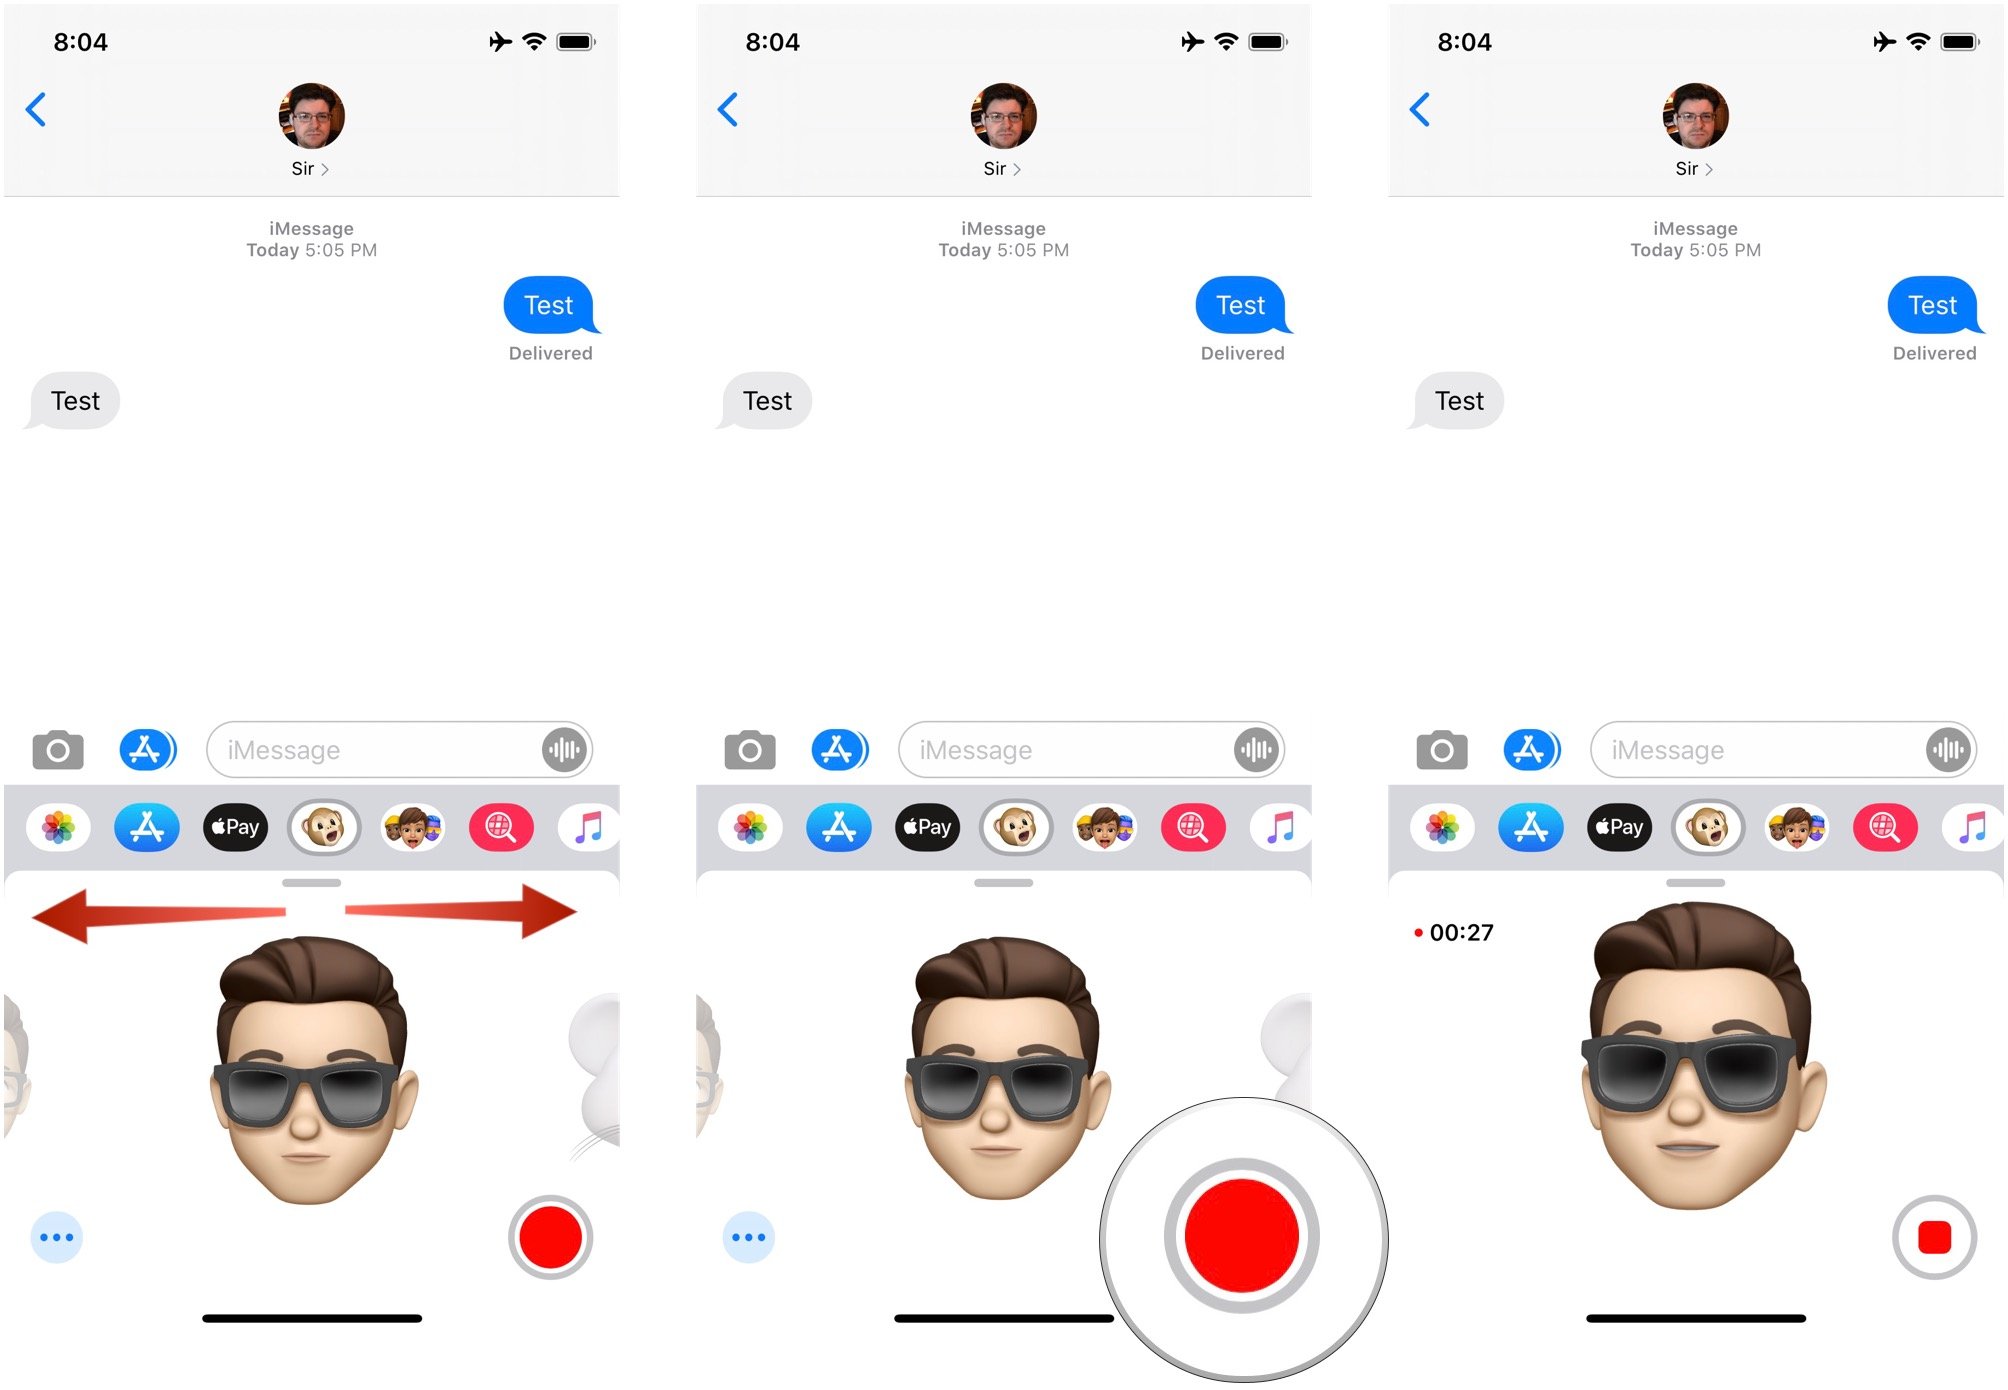 Send Animoji/Memoji,, showing how to scroll left or right, tap the record button, then record your Animoji